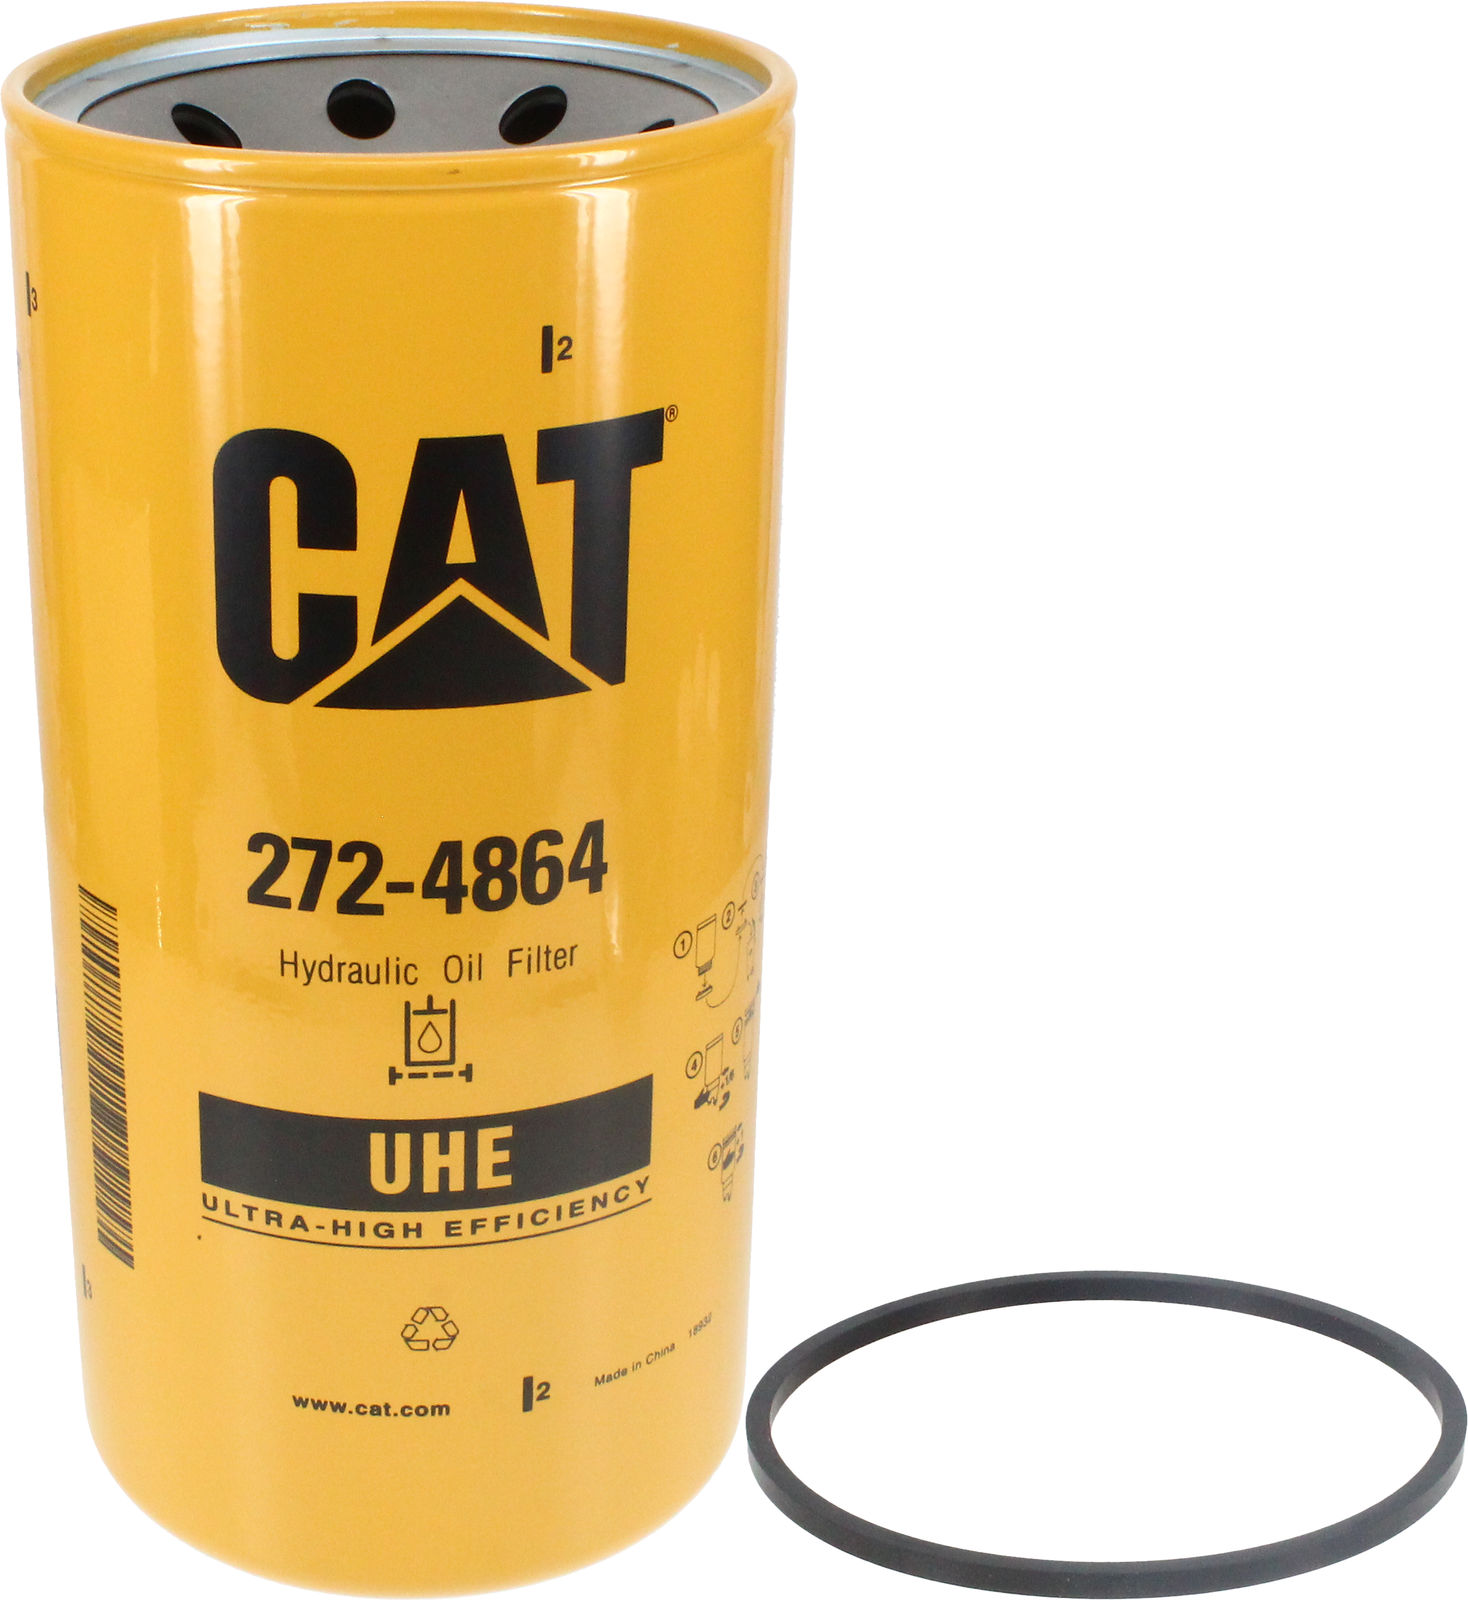 Genuine CAT Hydraulic Oil Filter 2724864 for D7G D7G2